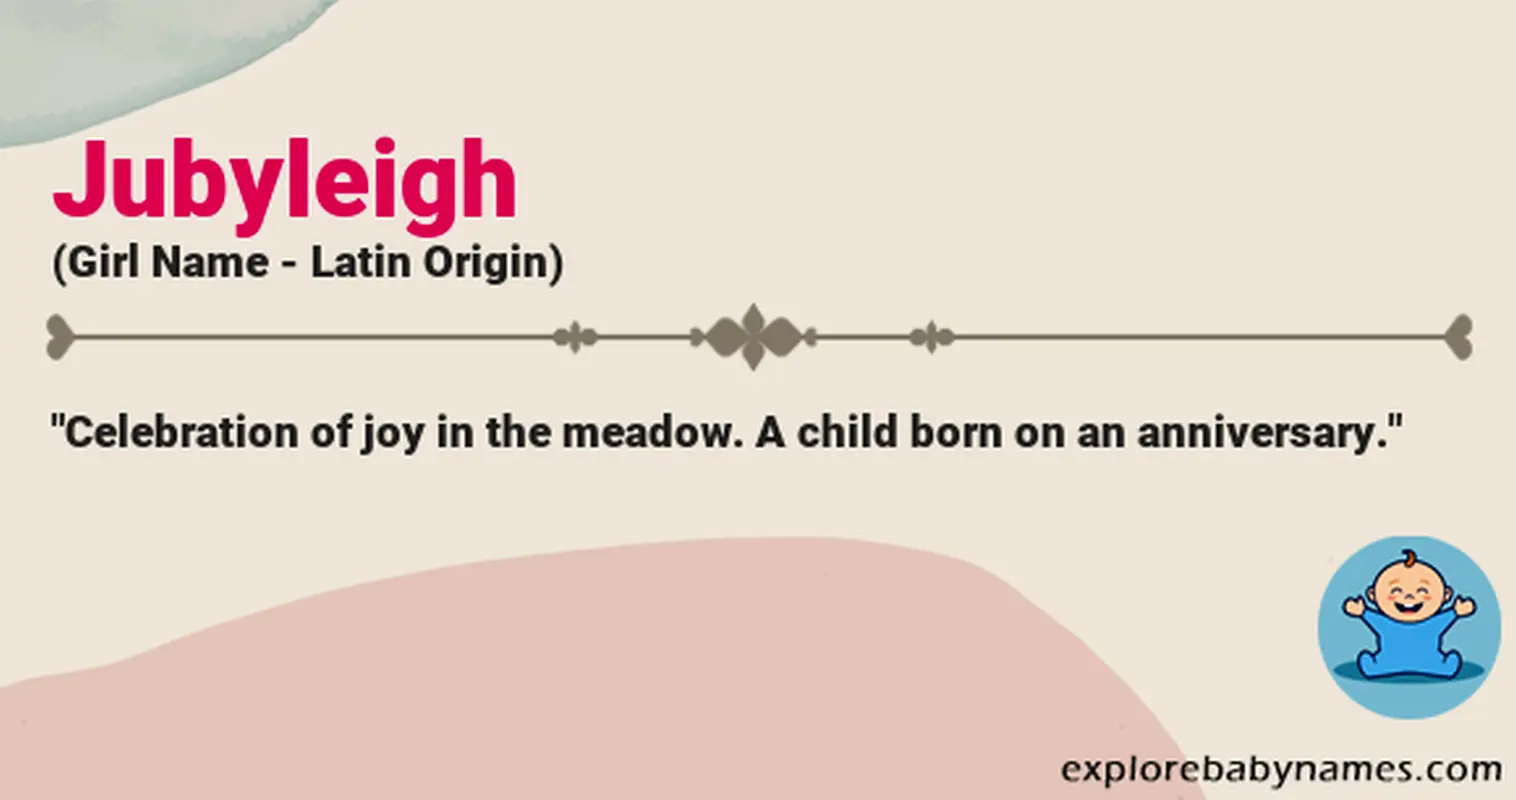 Meaning of Jubyleigh